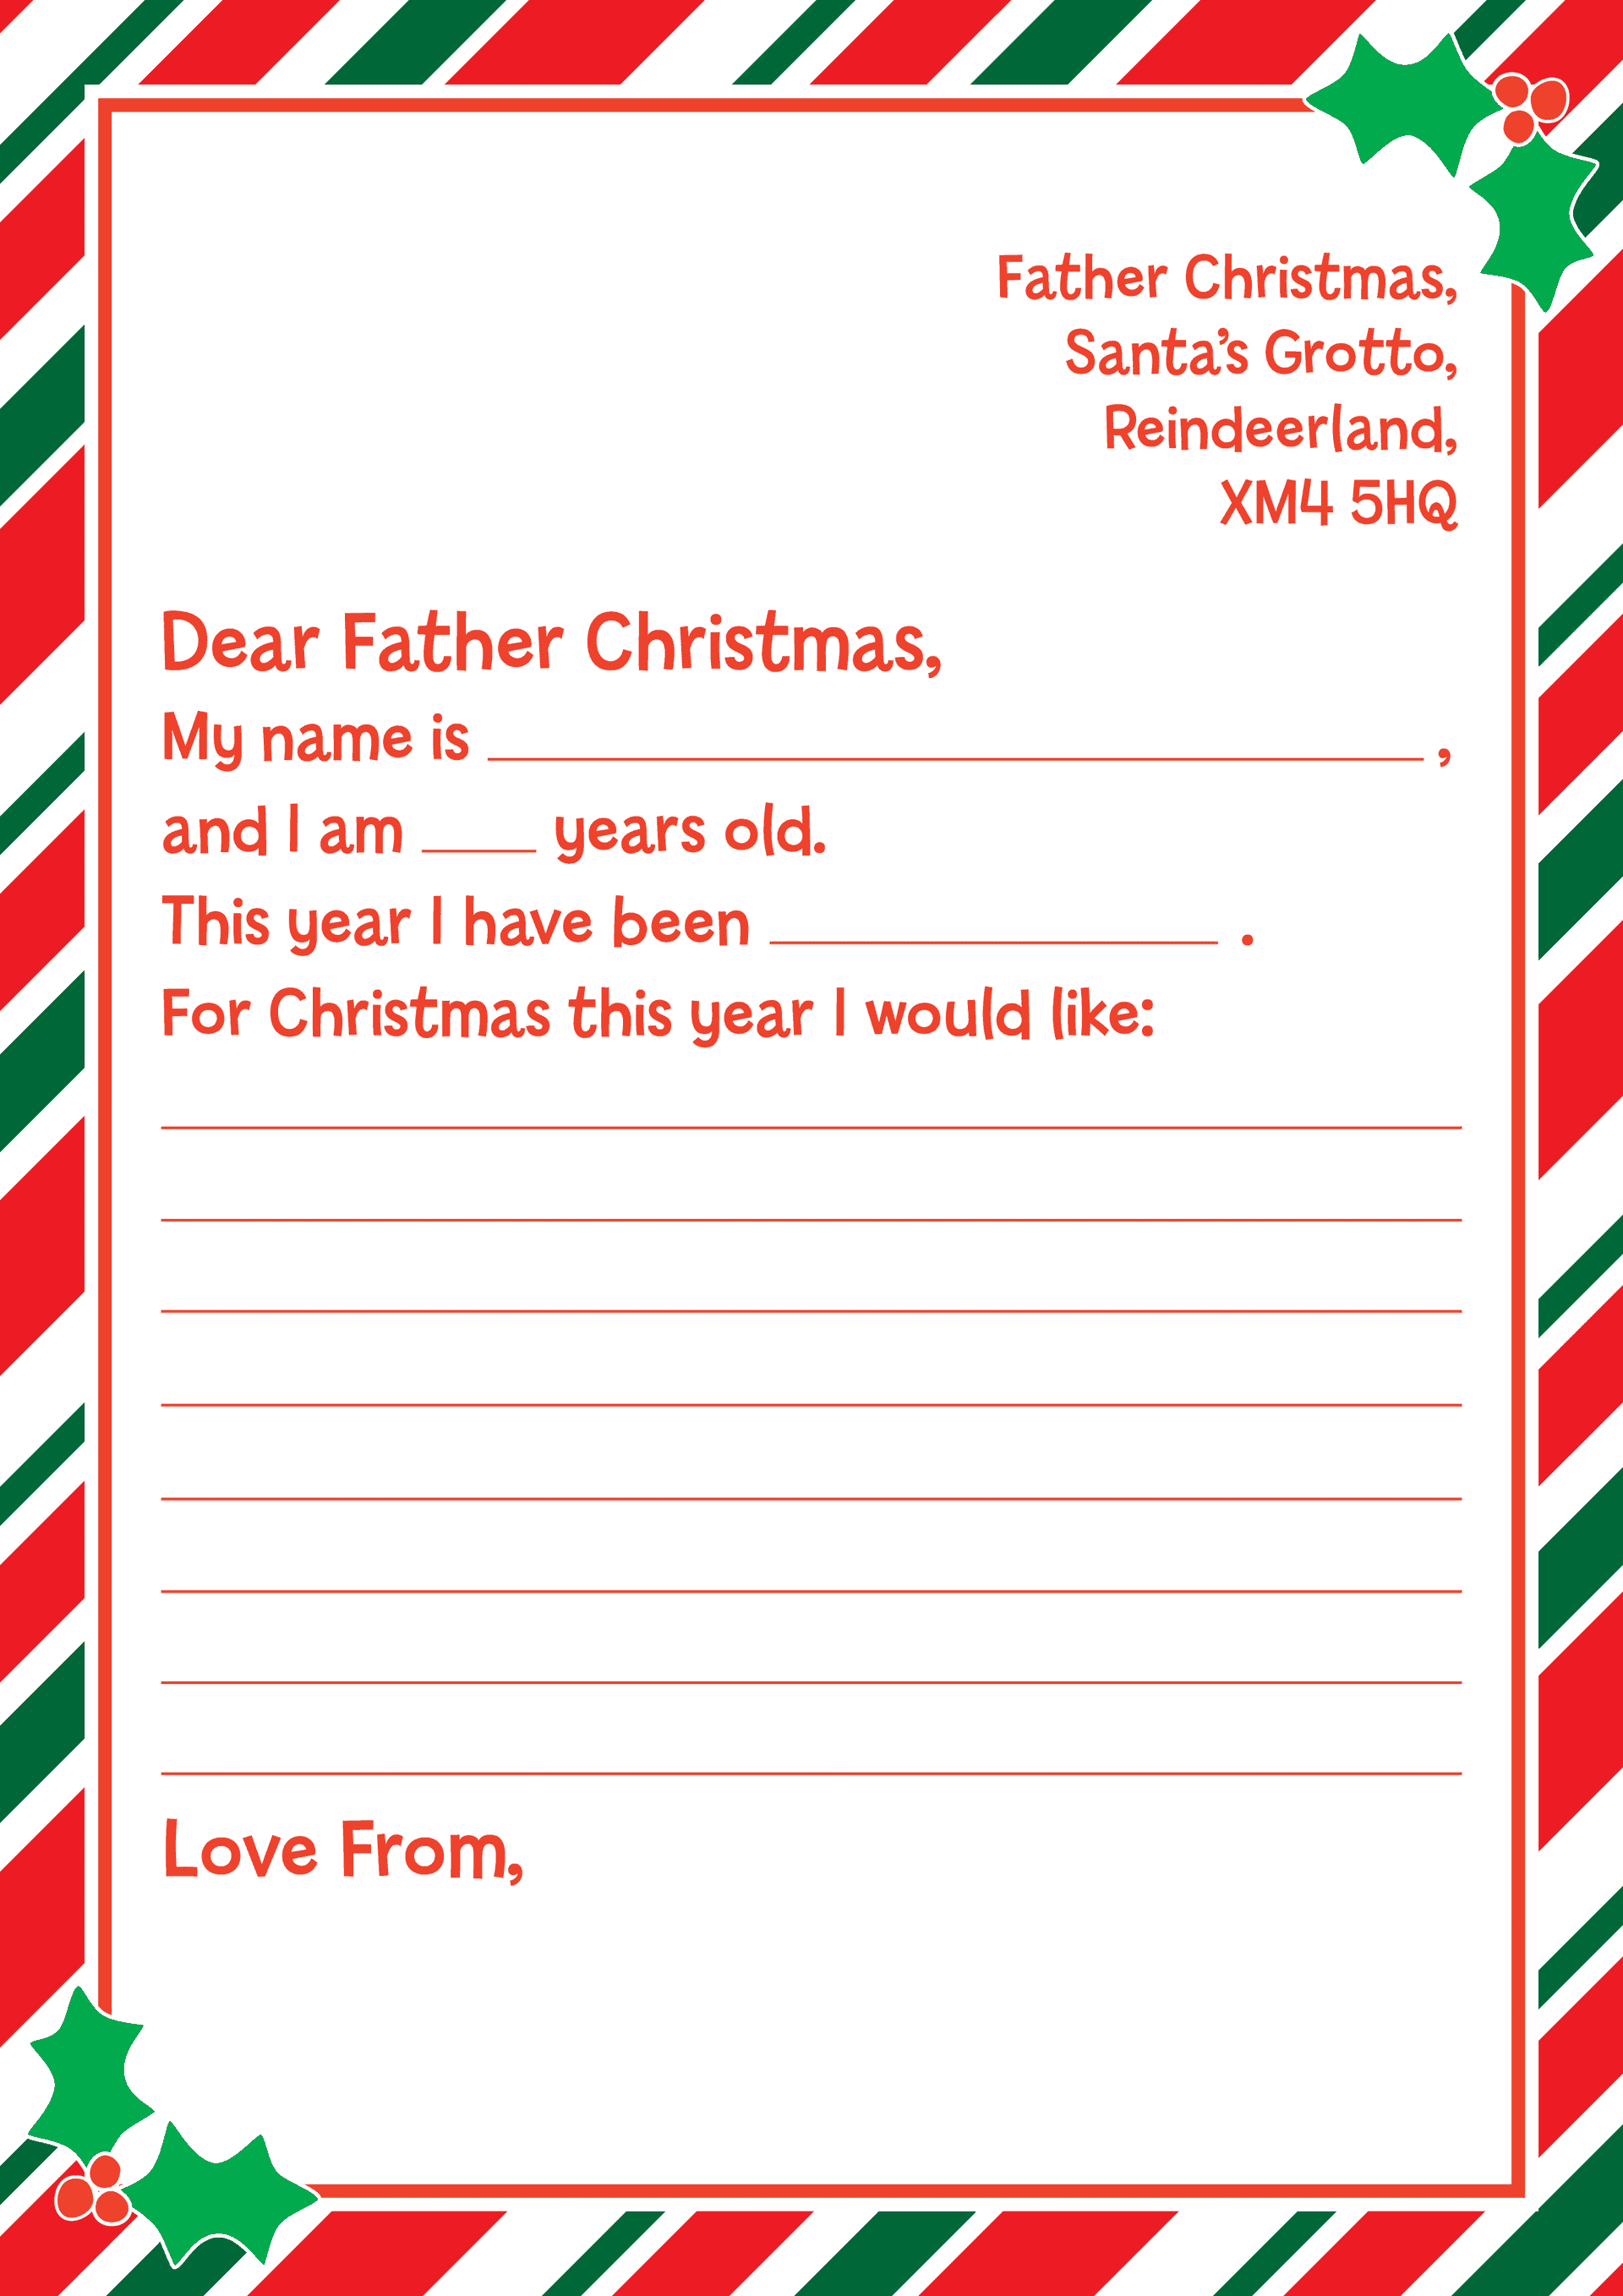 father-christmas-letter-template-cheapest-shopping-save-65-jlcatj-gob-mx